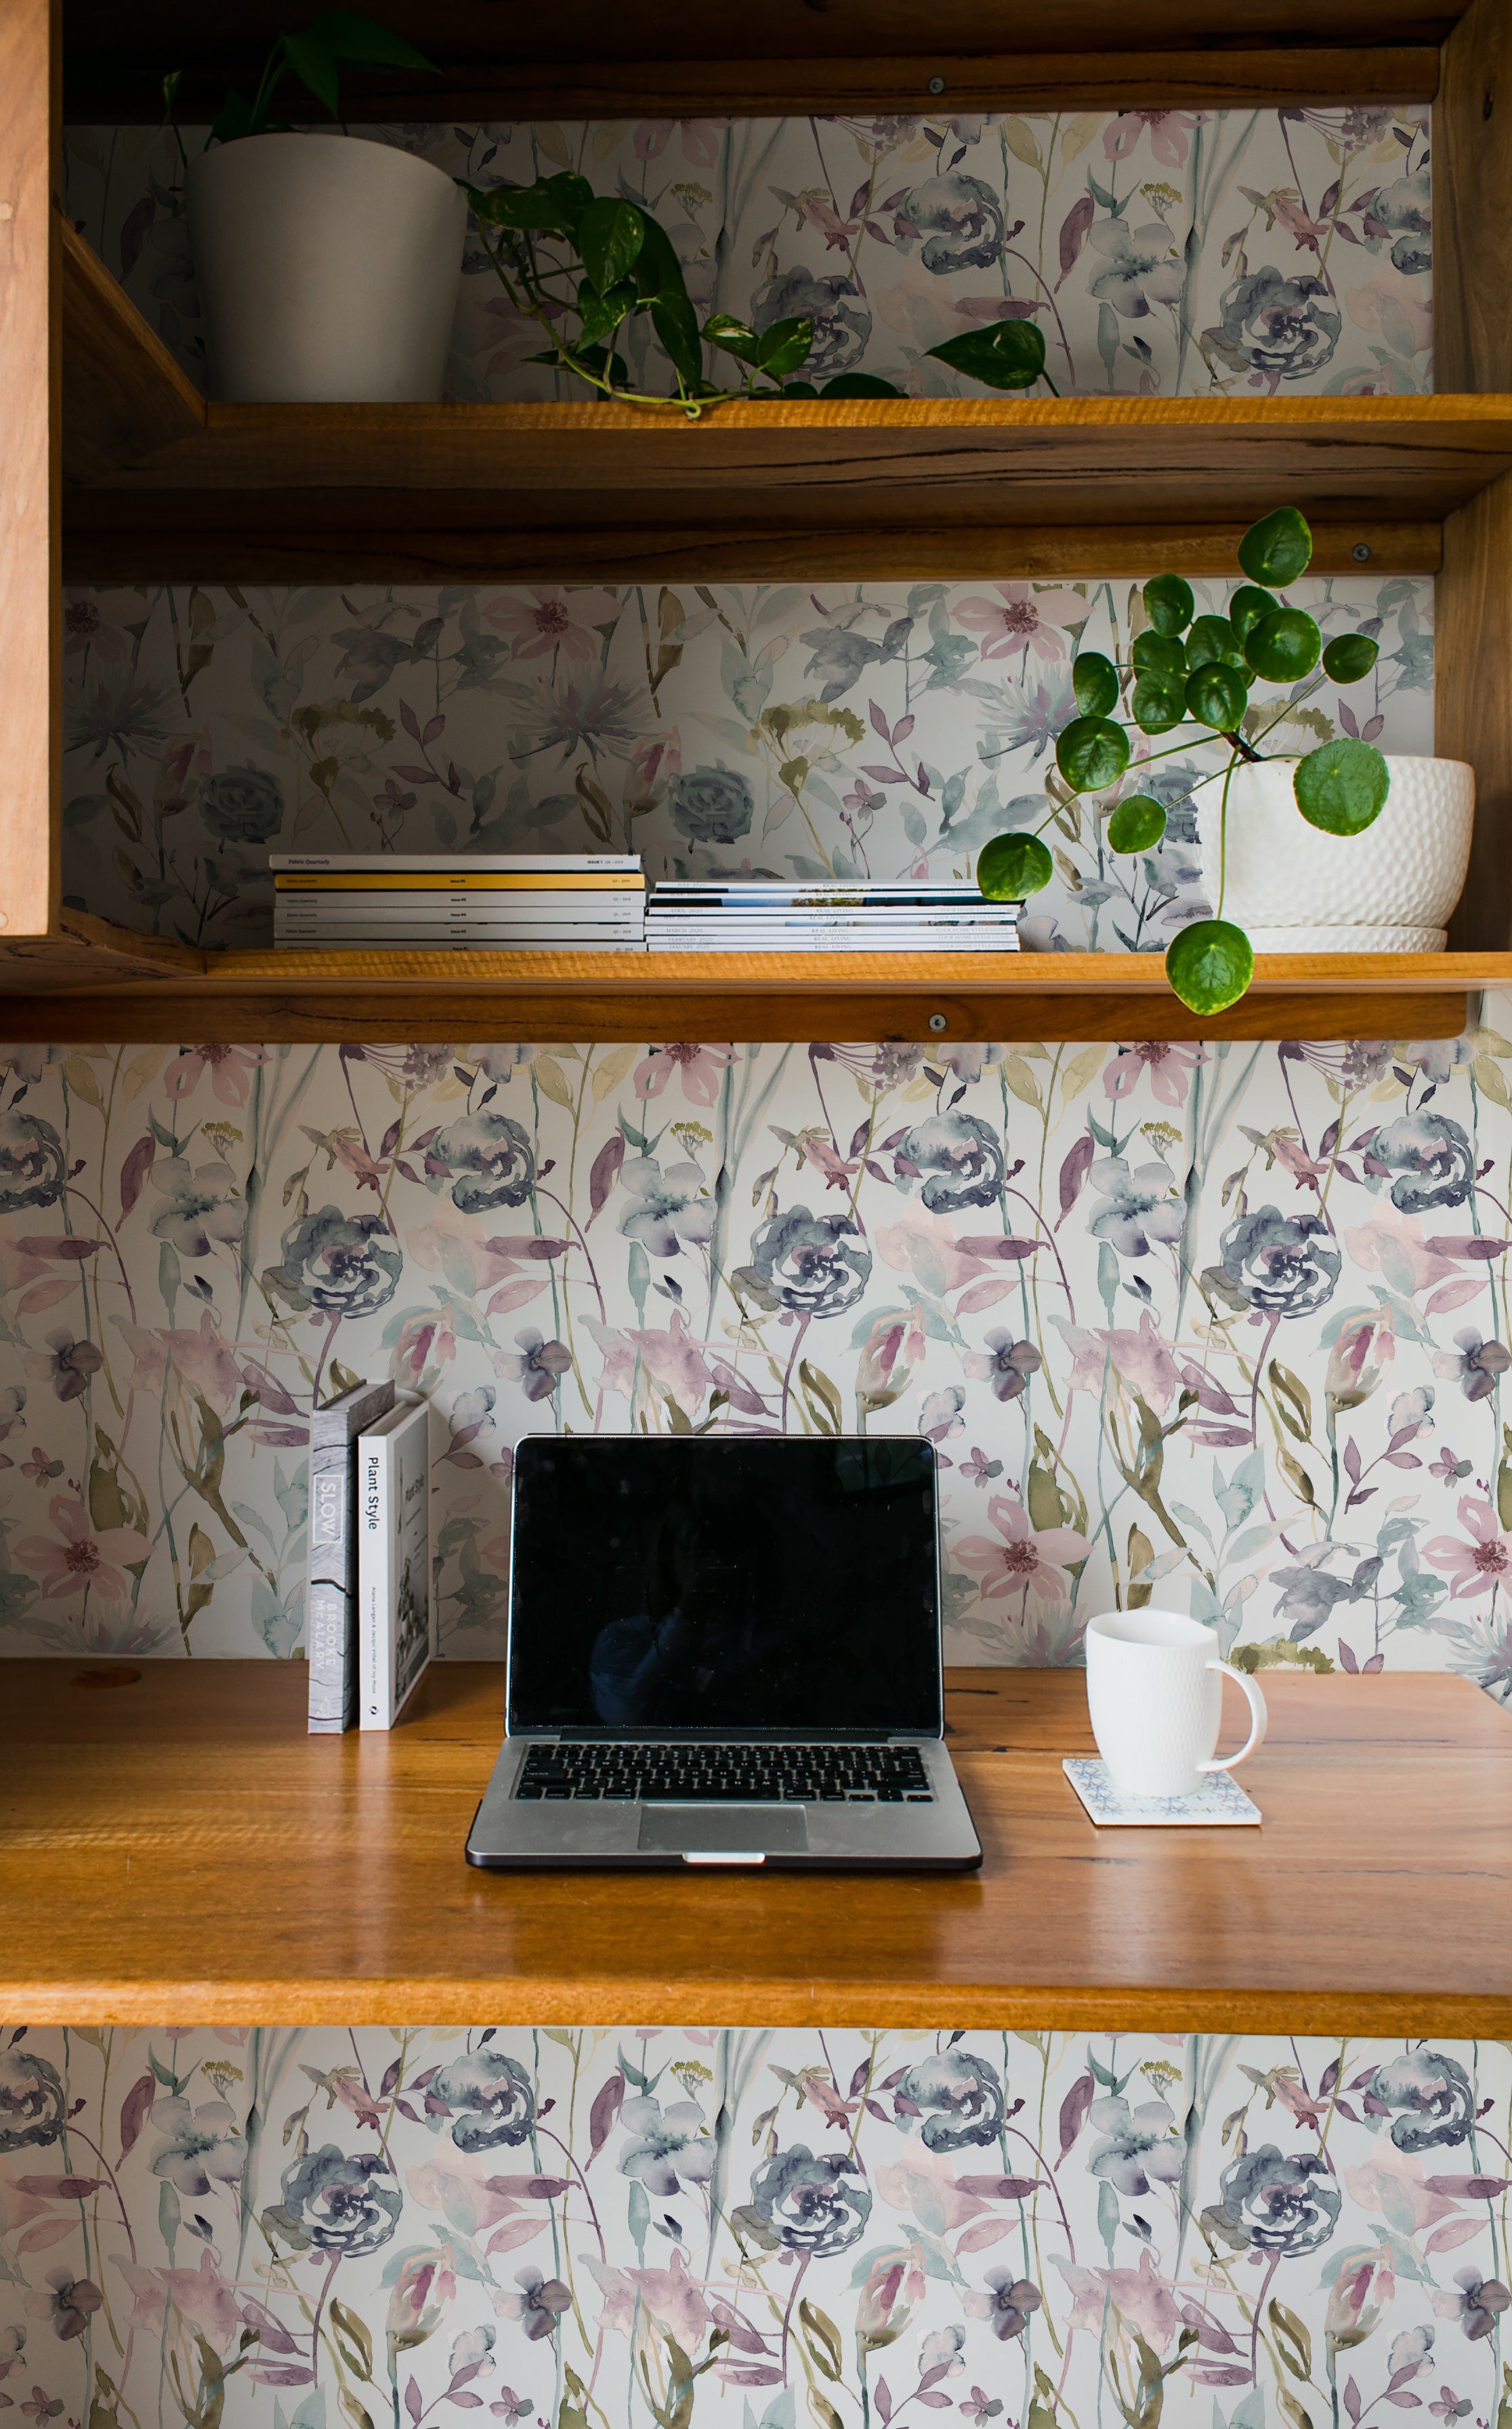 An organized home office space with a wooden desk and shelves, decorated with indoor plants and books. The wall behind the desk is covered in Watercolour Meadow Wallpaper, displaying delicate flowers in muted watercolor hues, creating a tranquil and inspiring work environment.